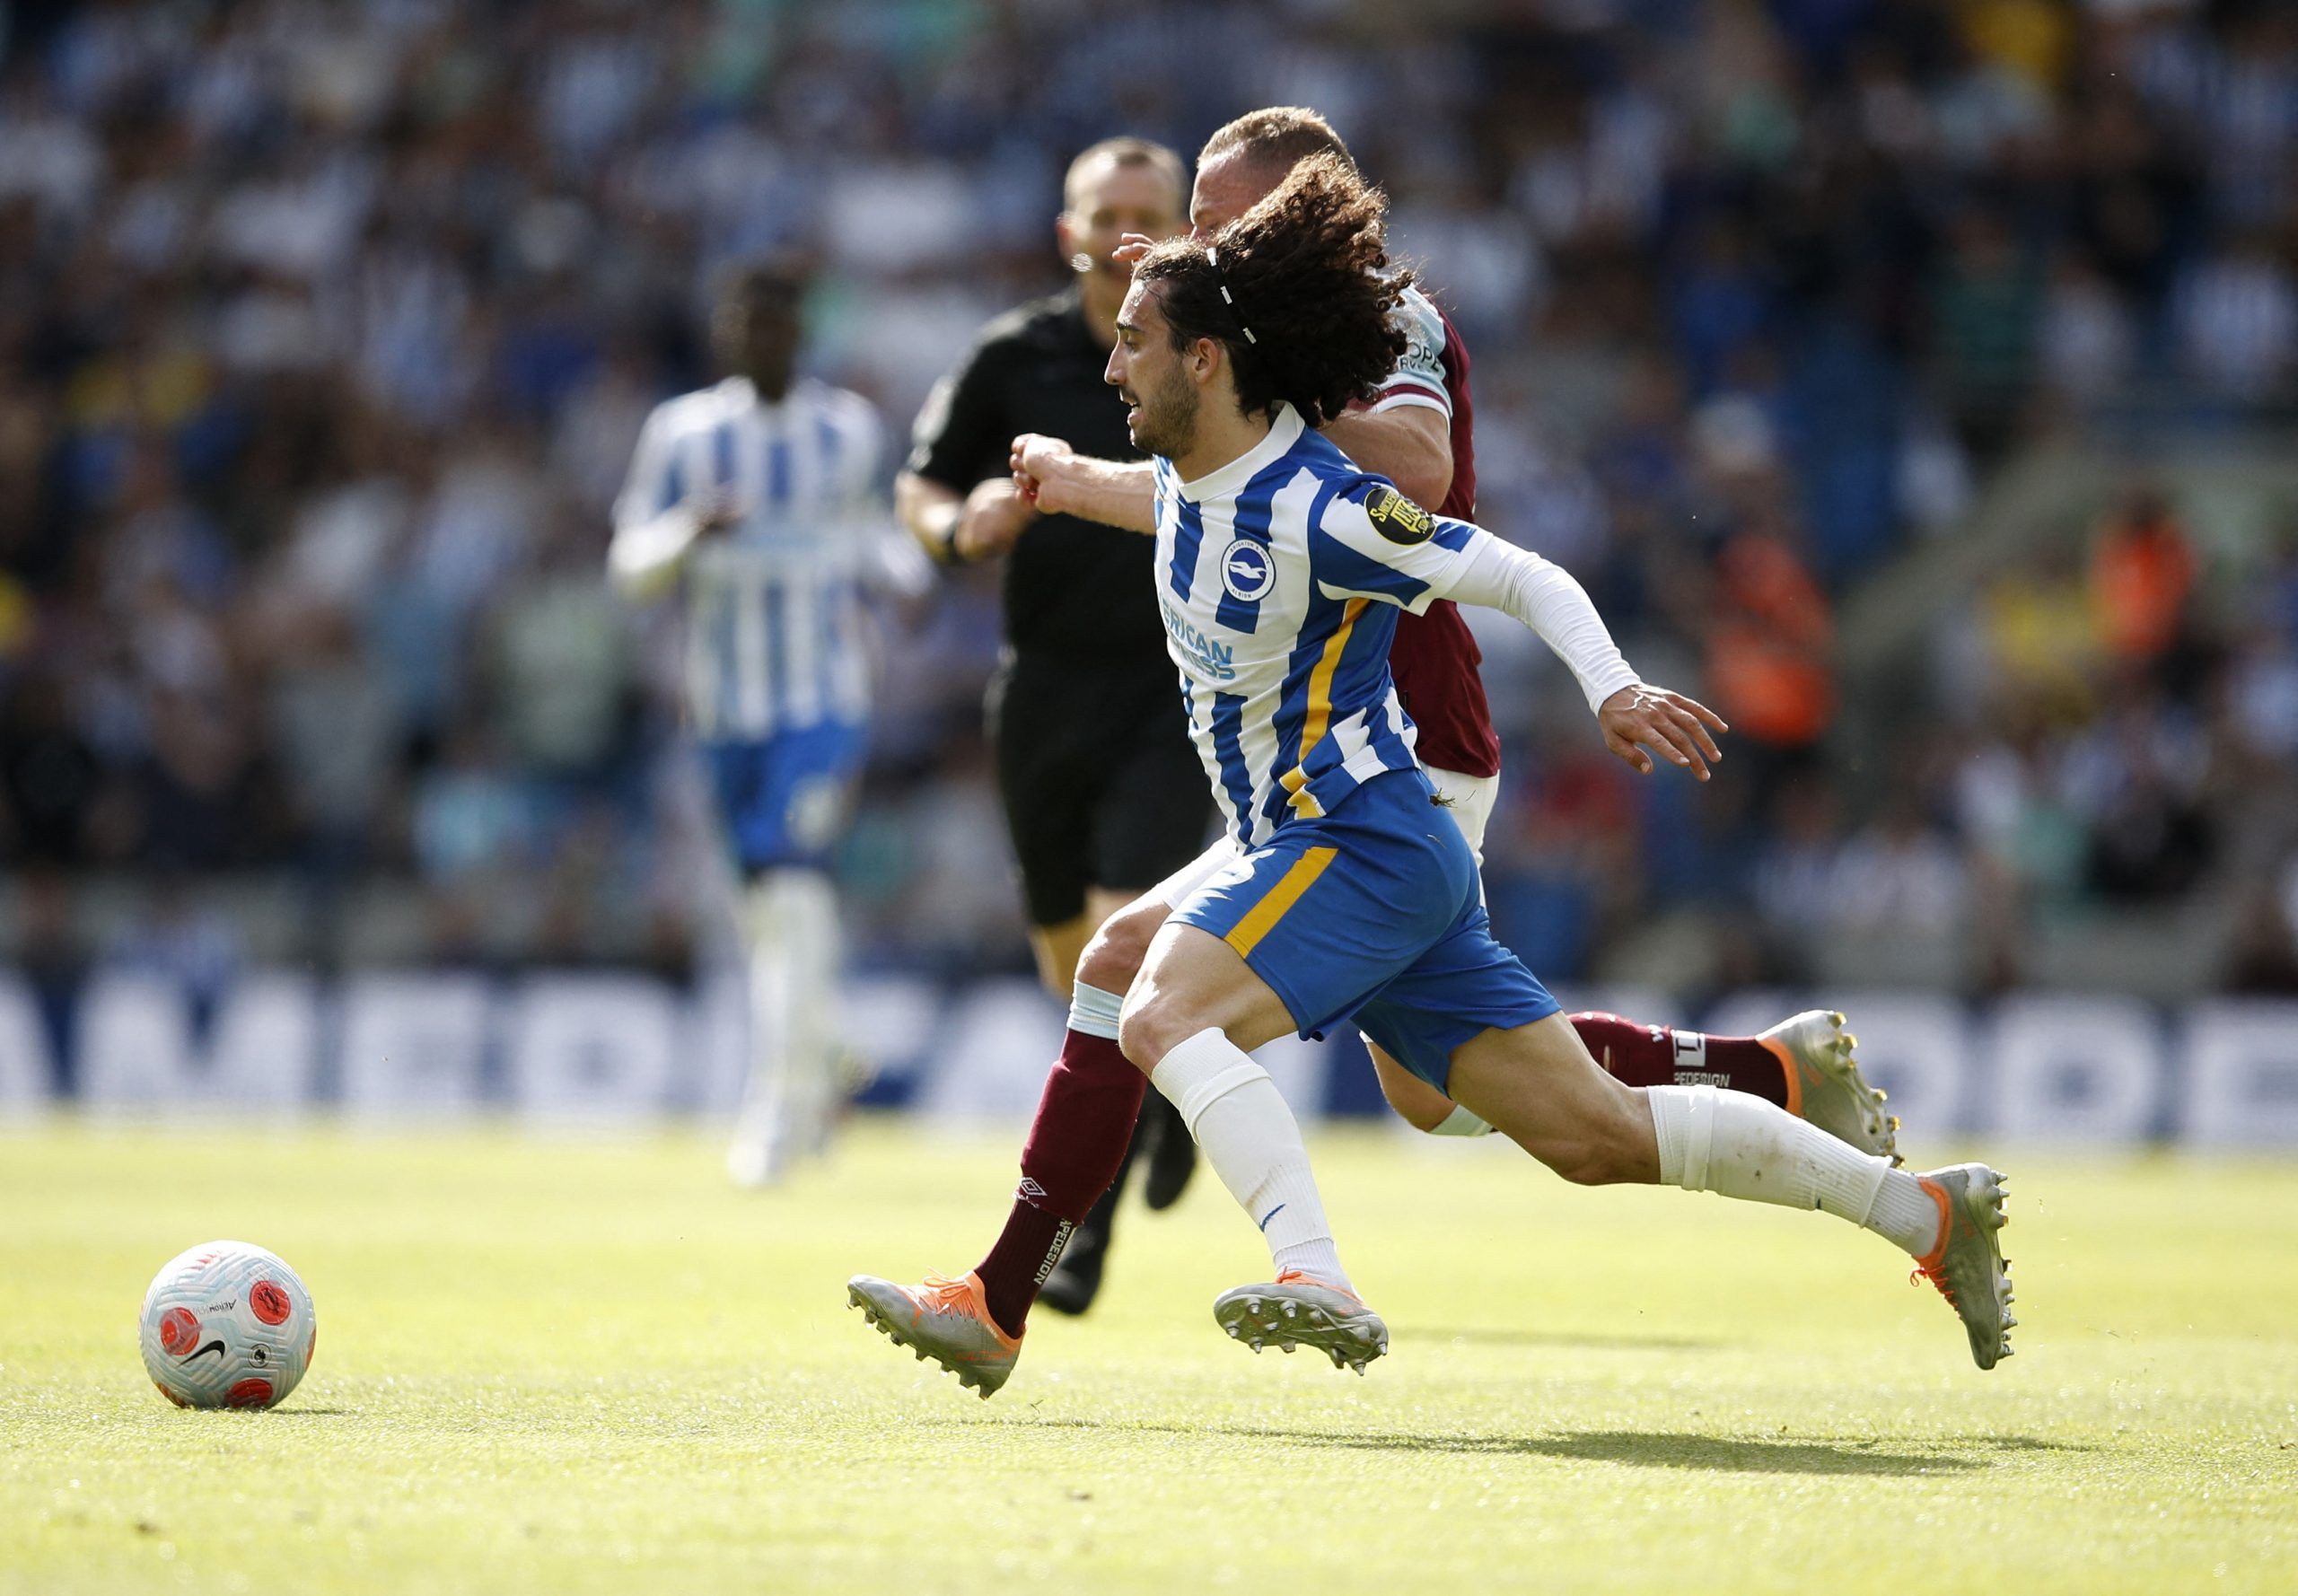 Soccer Football - Premier League - Brighton &amp; Hove Albion v West Ham United - The American Express Community Stadium, Brighton, Britain - May 22, 2022 Brighton &amp; Hove Albion's Marc Cucurella in action REUTERS/Peter Nicholls EDITORIAL USE ONLY. No use with unauthorized audio, video, data, fixture lists, club/league logos or 'live' services. Online in-match use limited to 75 images, no video emulation. No use in betting, games or single club /league/player publications.  Please contact you